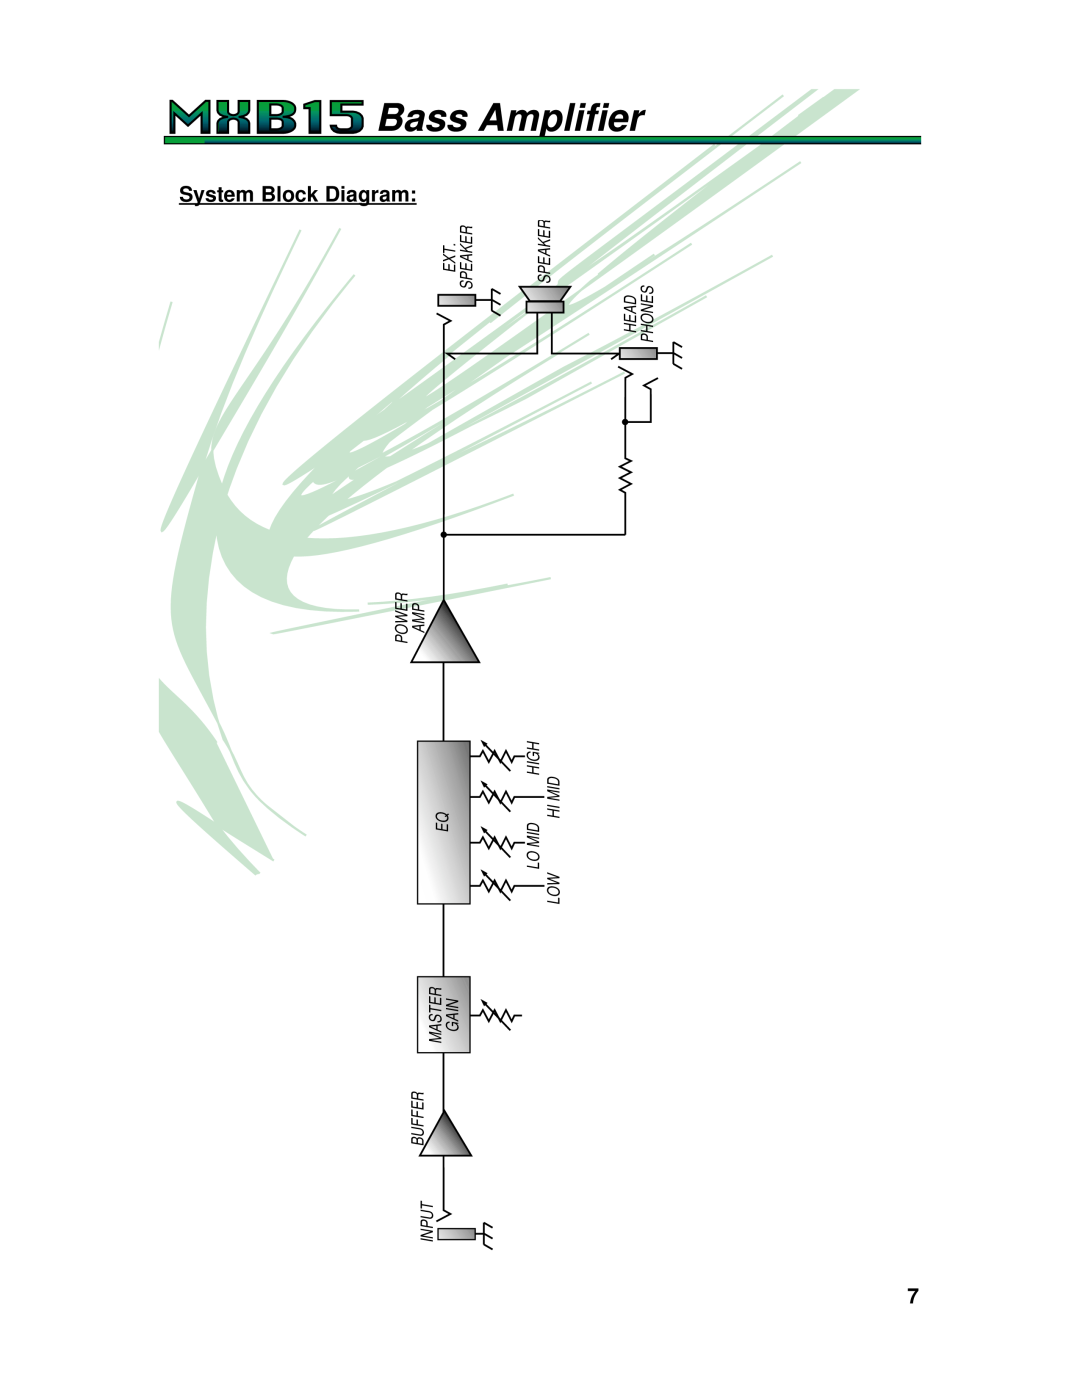 Crate Amplifiers MXB15 System Block Diagram, Bass Amplifier, Input, Buffer, Master Gain, Lo Mid, High, Hi Mid, Power Amp 